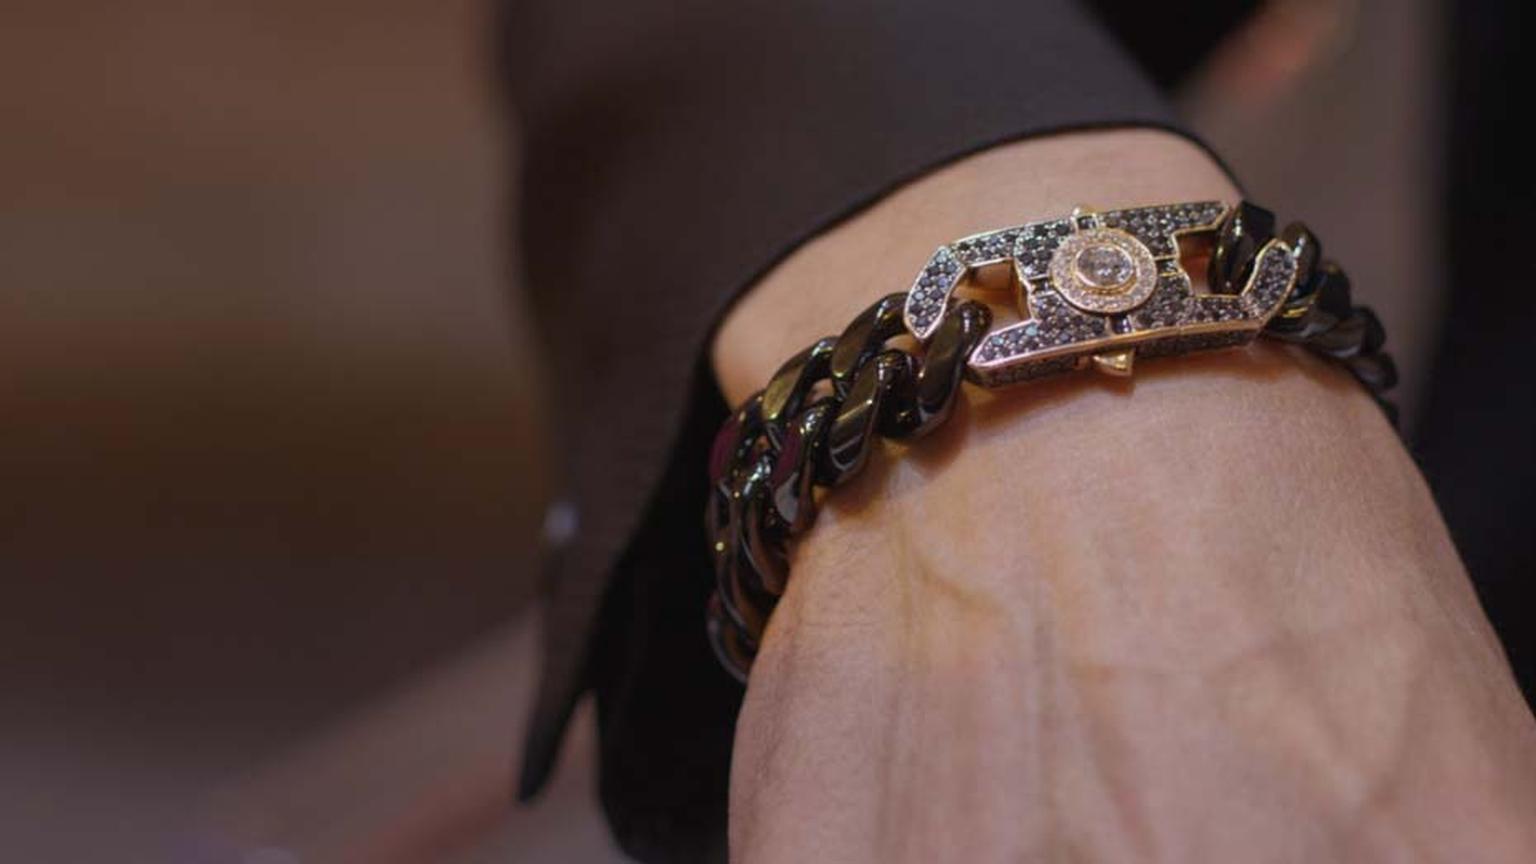 The Couture Show Las Vegas was the perfect opportunity for British jeweller Stephen Webster to show some masculine bracelets that take the brand into a new era of sophisticated men's jewellery